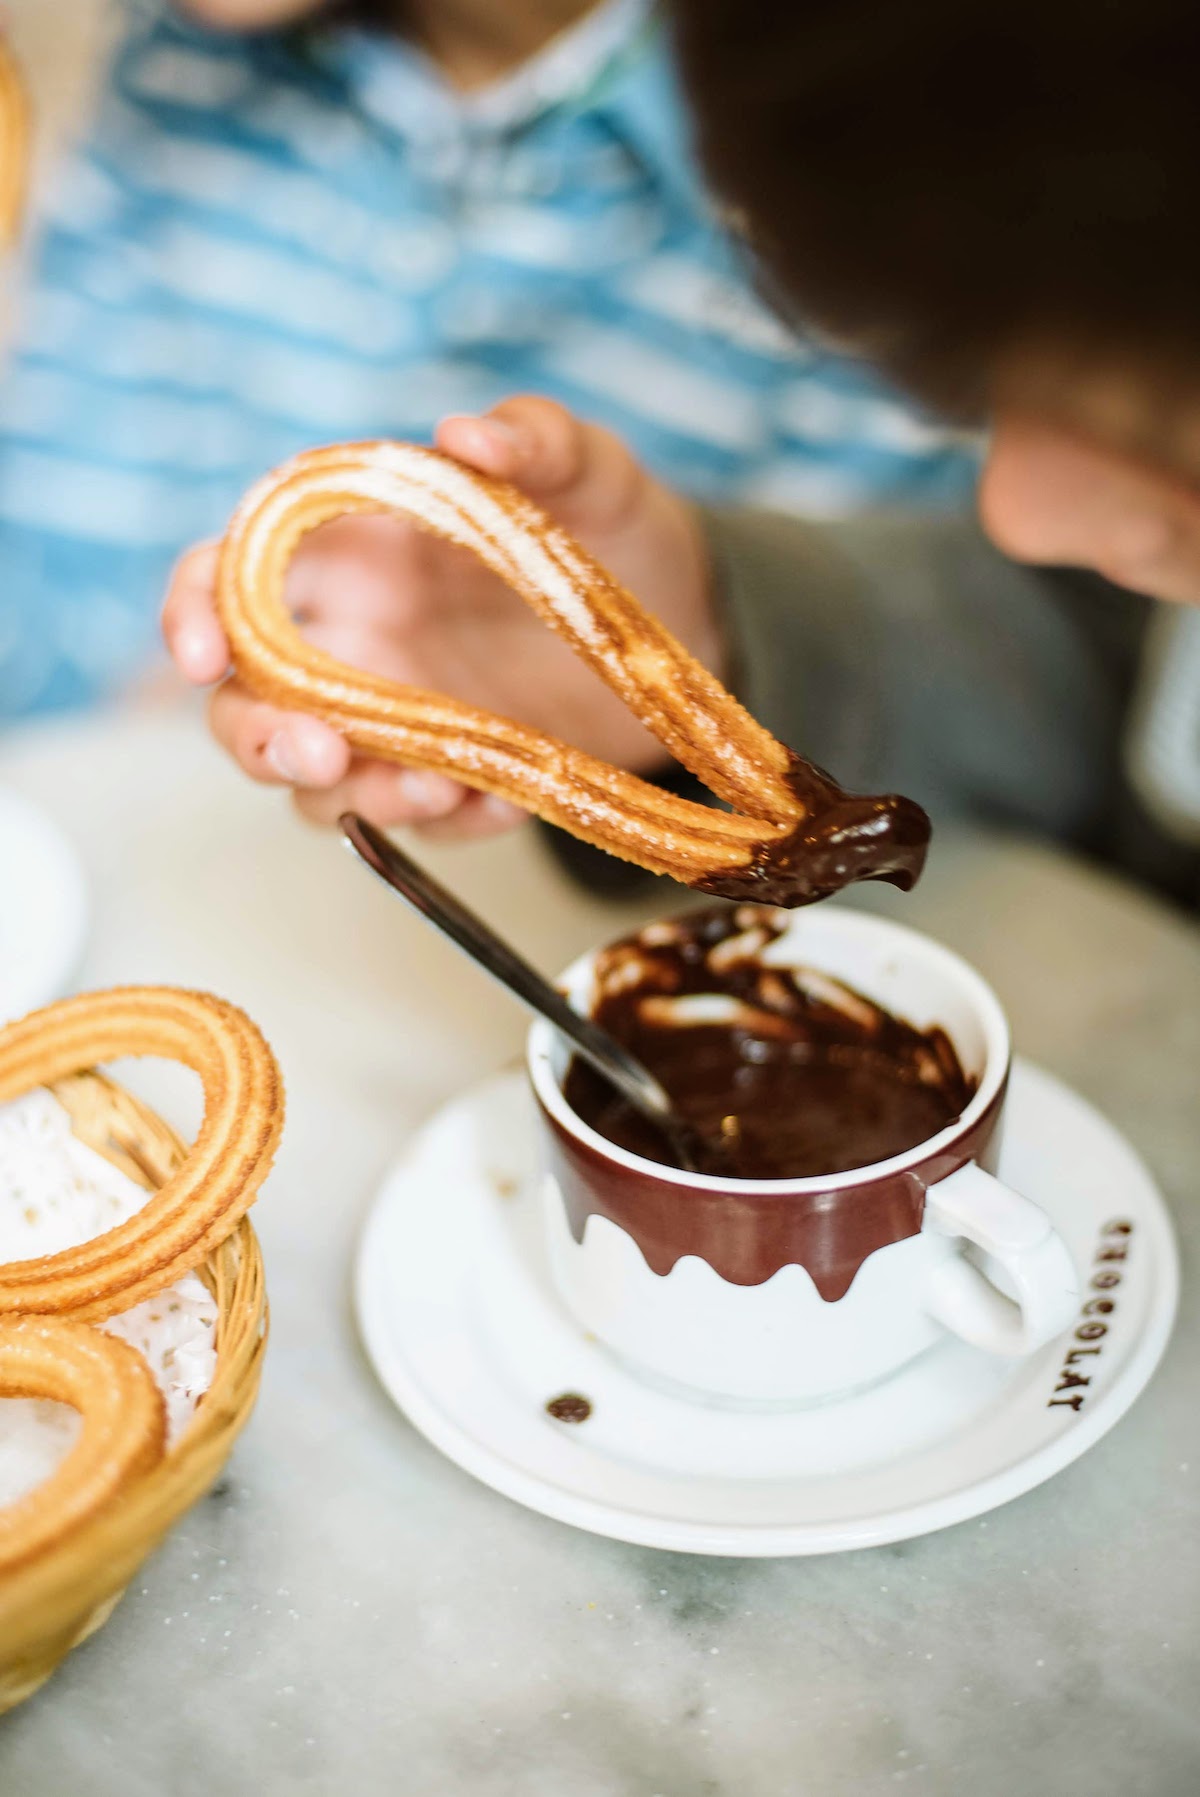 Child's hand dipping sugar-covered churros into a mug of thick hot chocolate